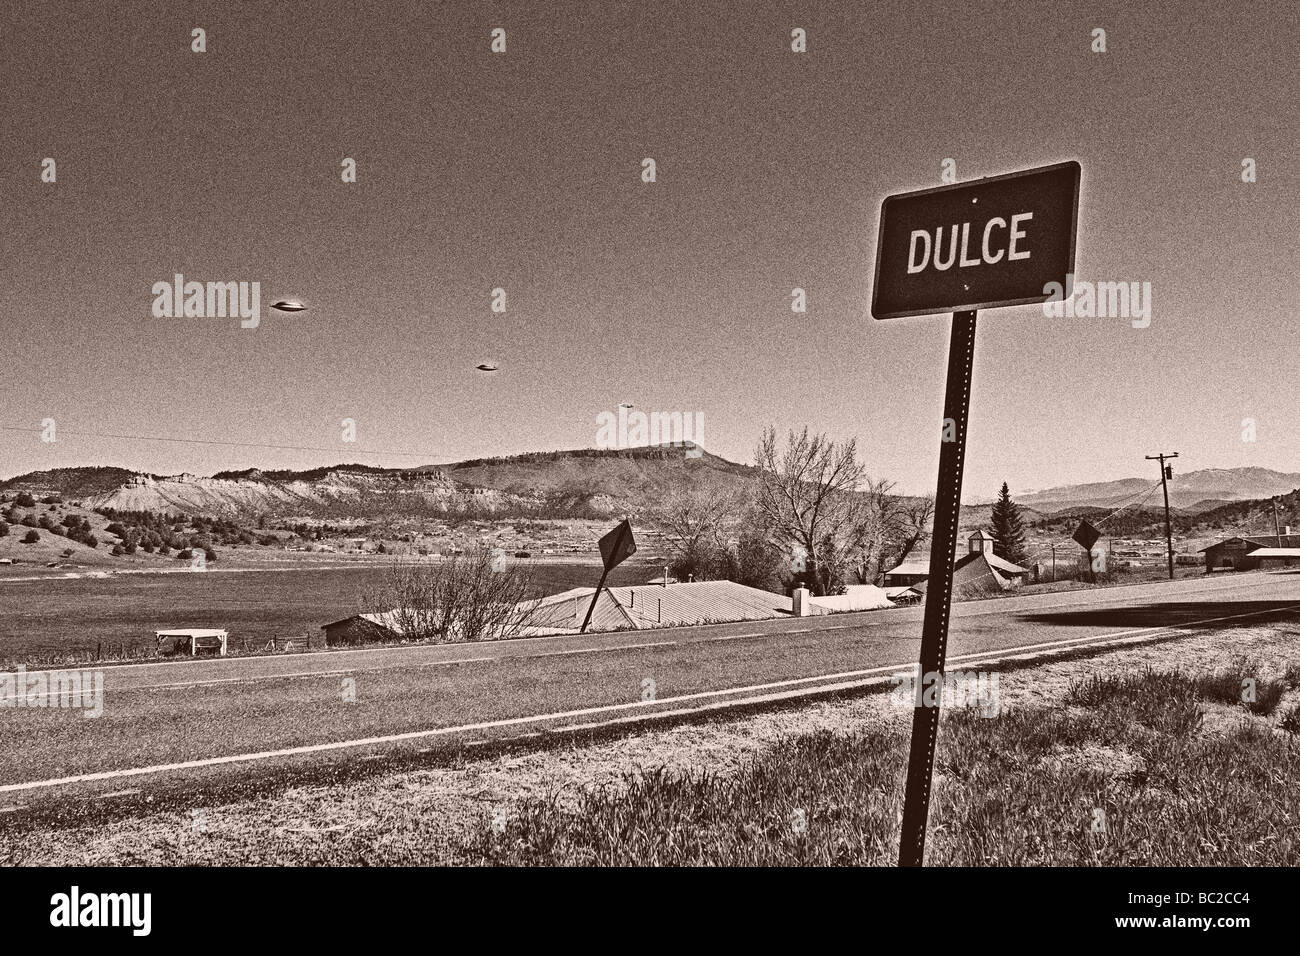 UFO sighting in Infrared, Dulce, New Mexico, USA Stock Photo